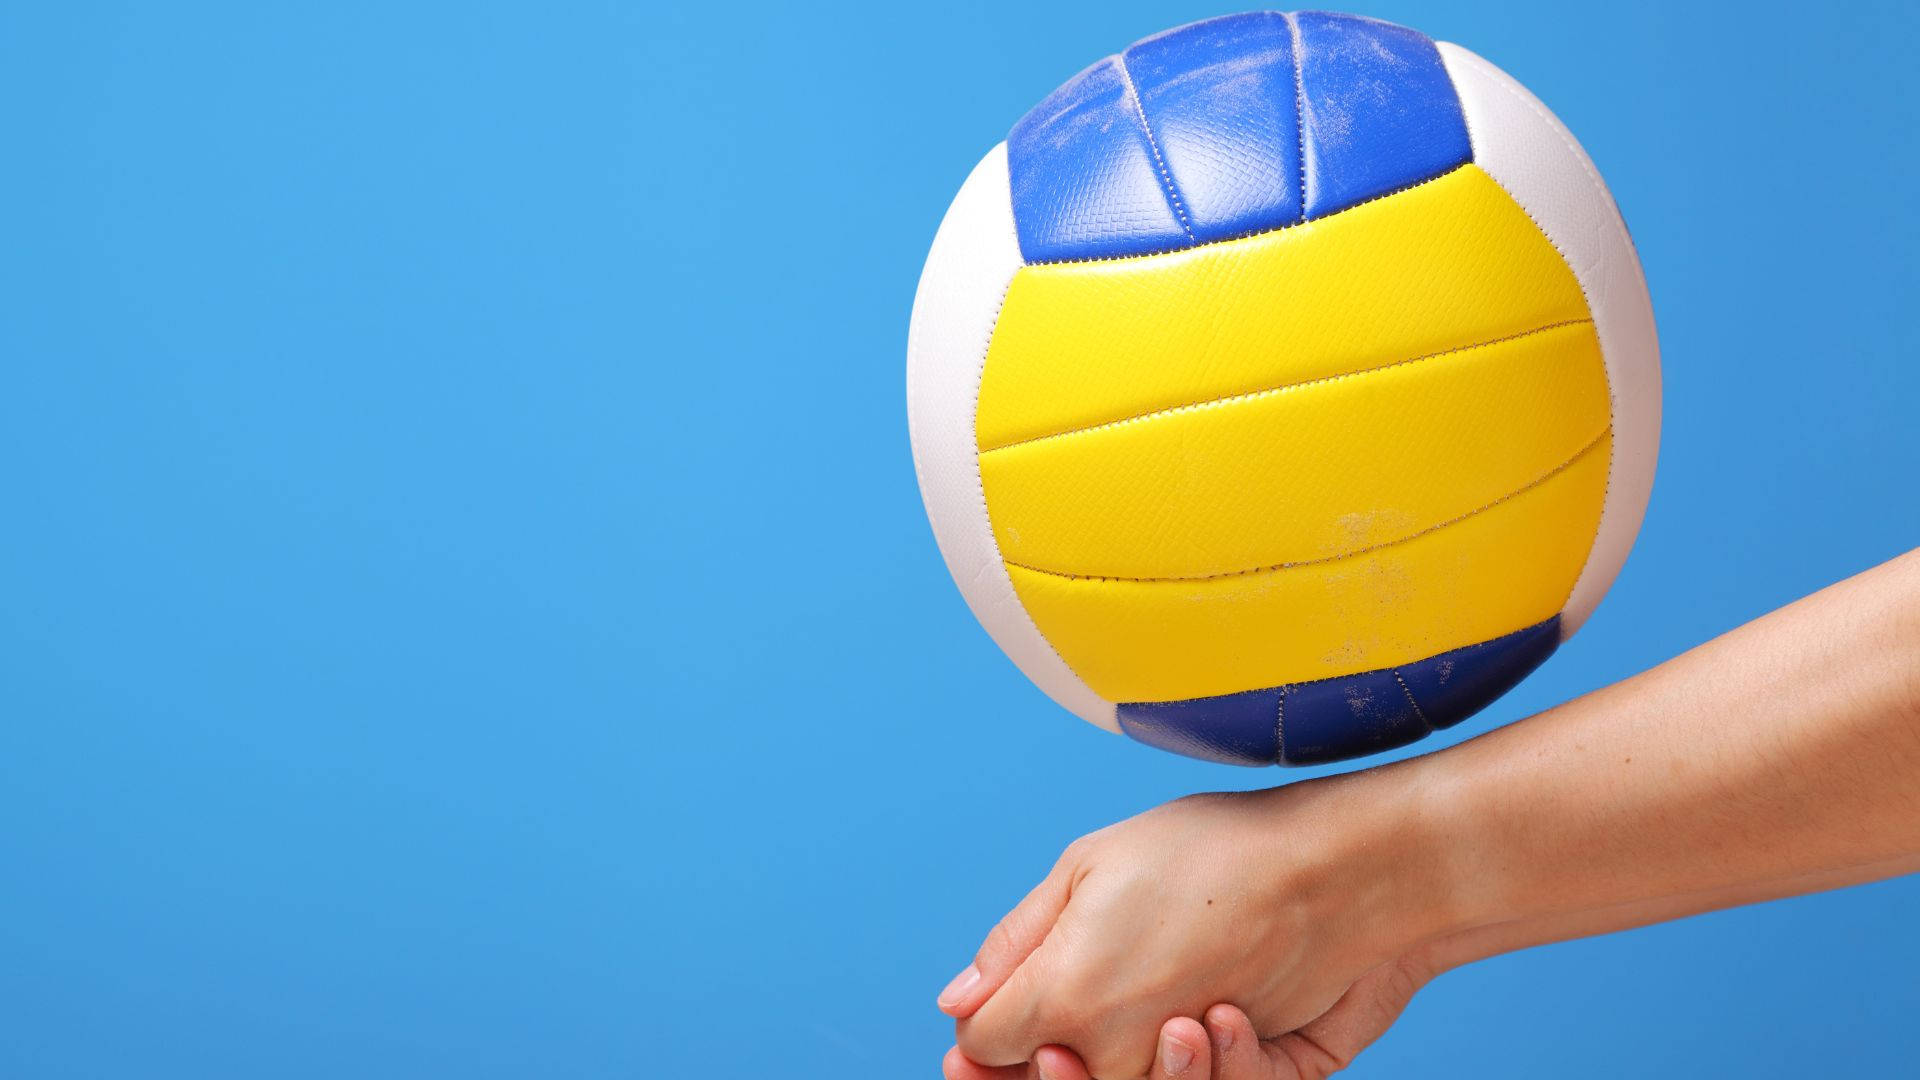 Free Volleyball Aesthetic Wallpaper Downloads, Volleyball Aesthetic Wallpaper for FREE